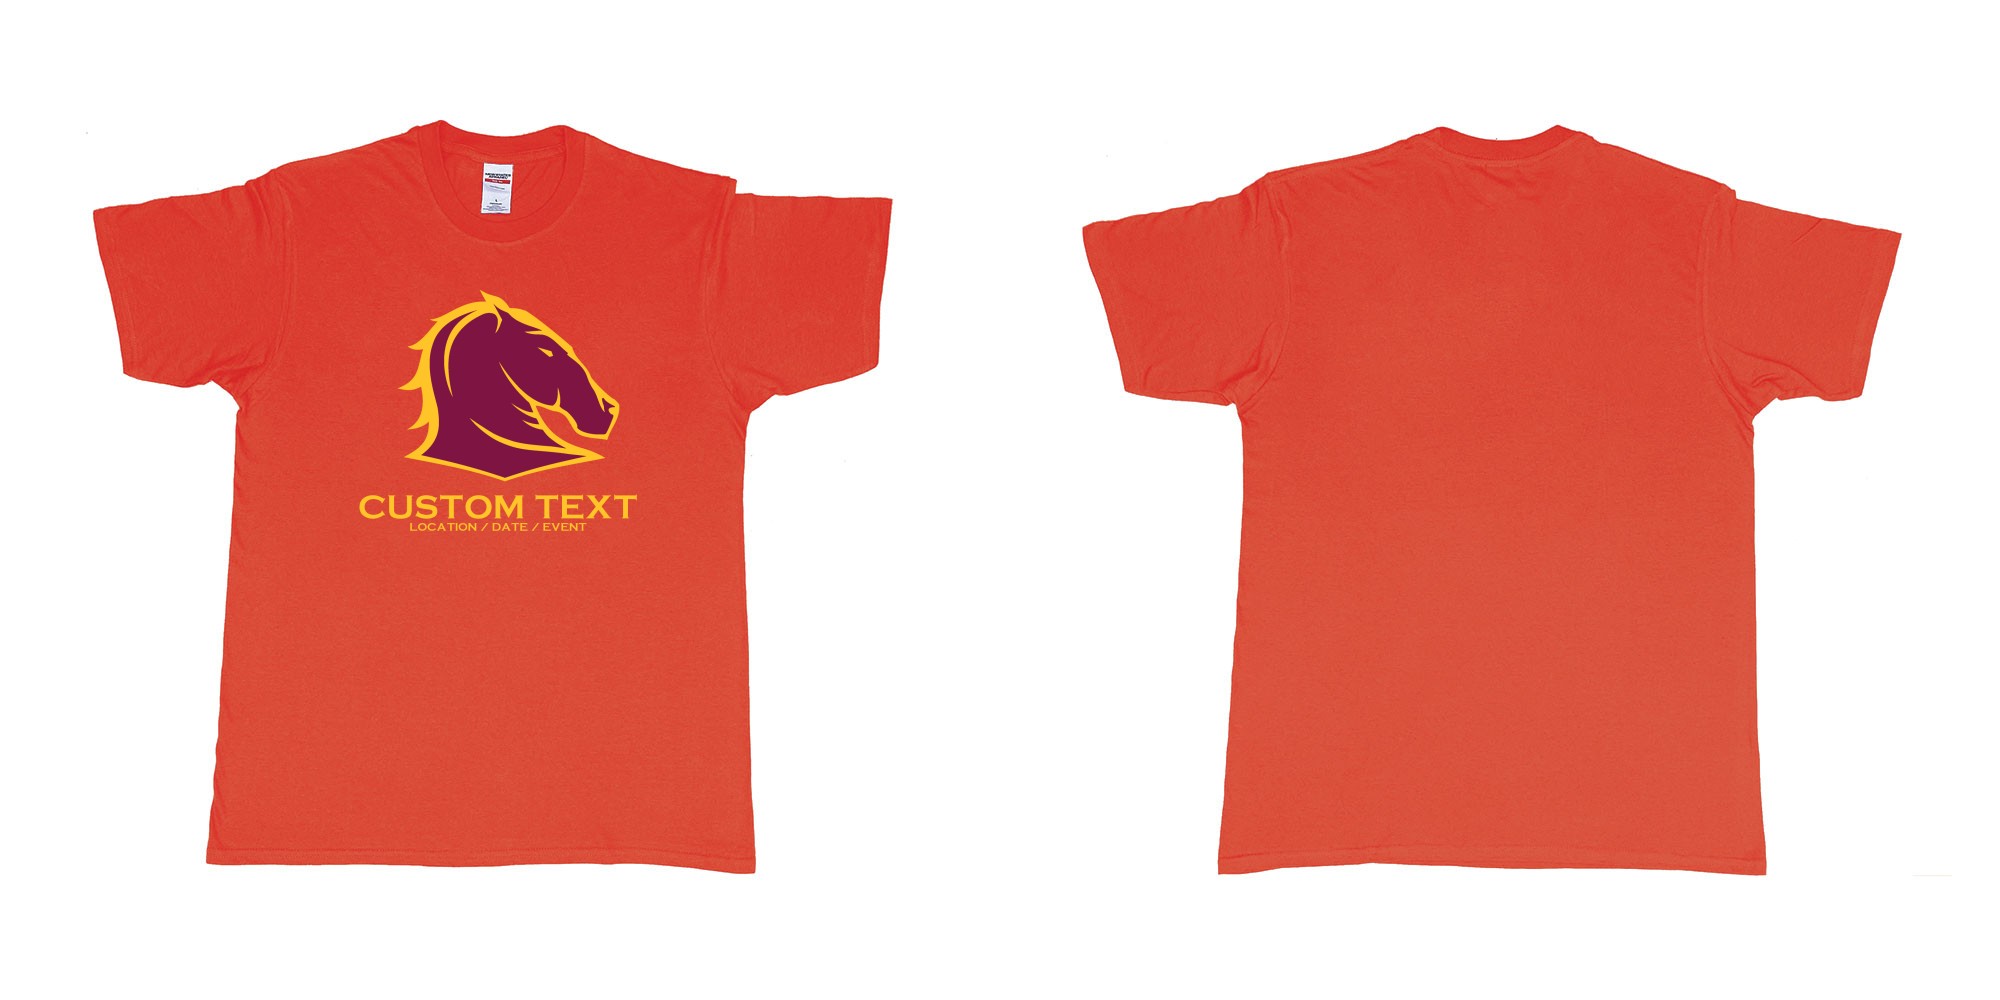 Custom tshirt design brisbane broncos australian professional rugby league football club queensland in fabric color red choice your own text made in Bali by The Pirate Way